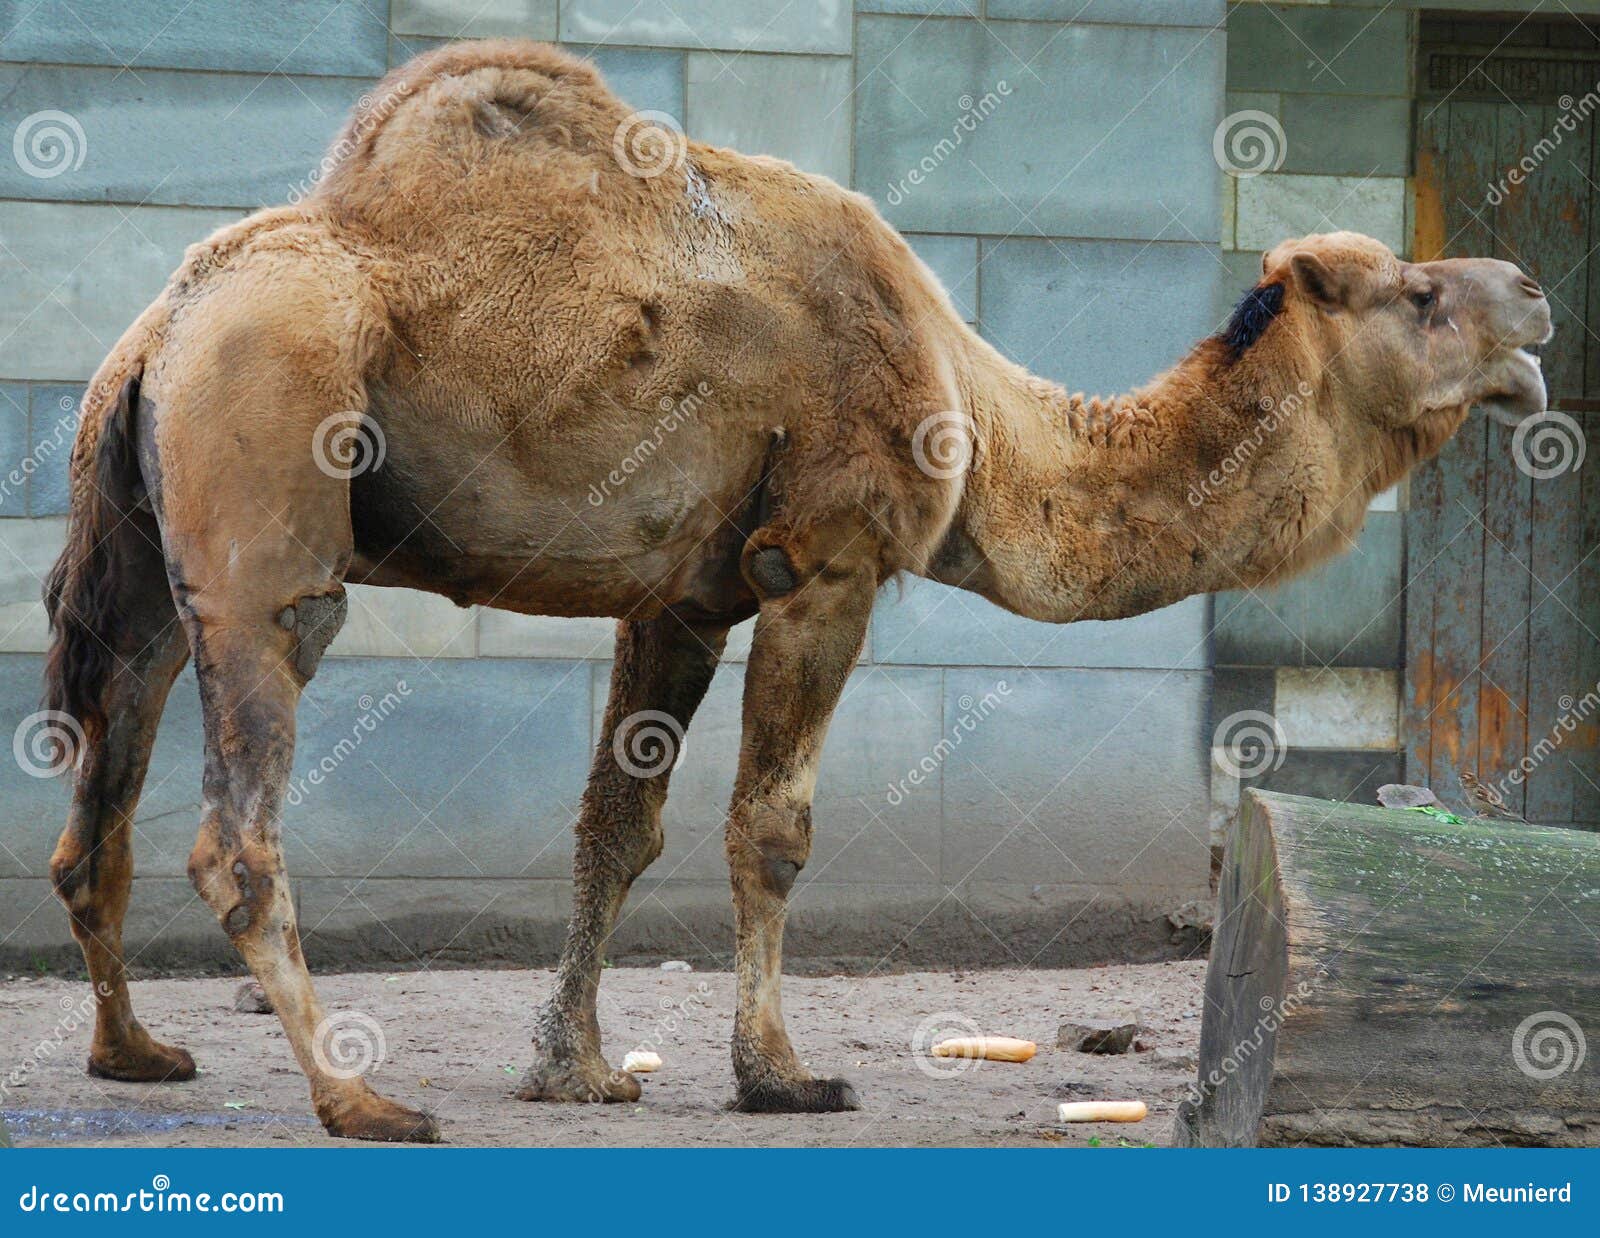 camel is an ungulate within the genus camelus,